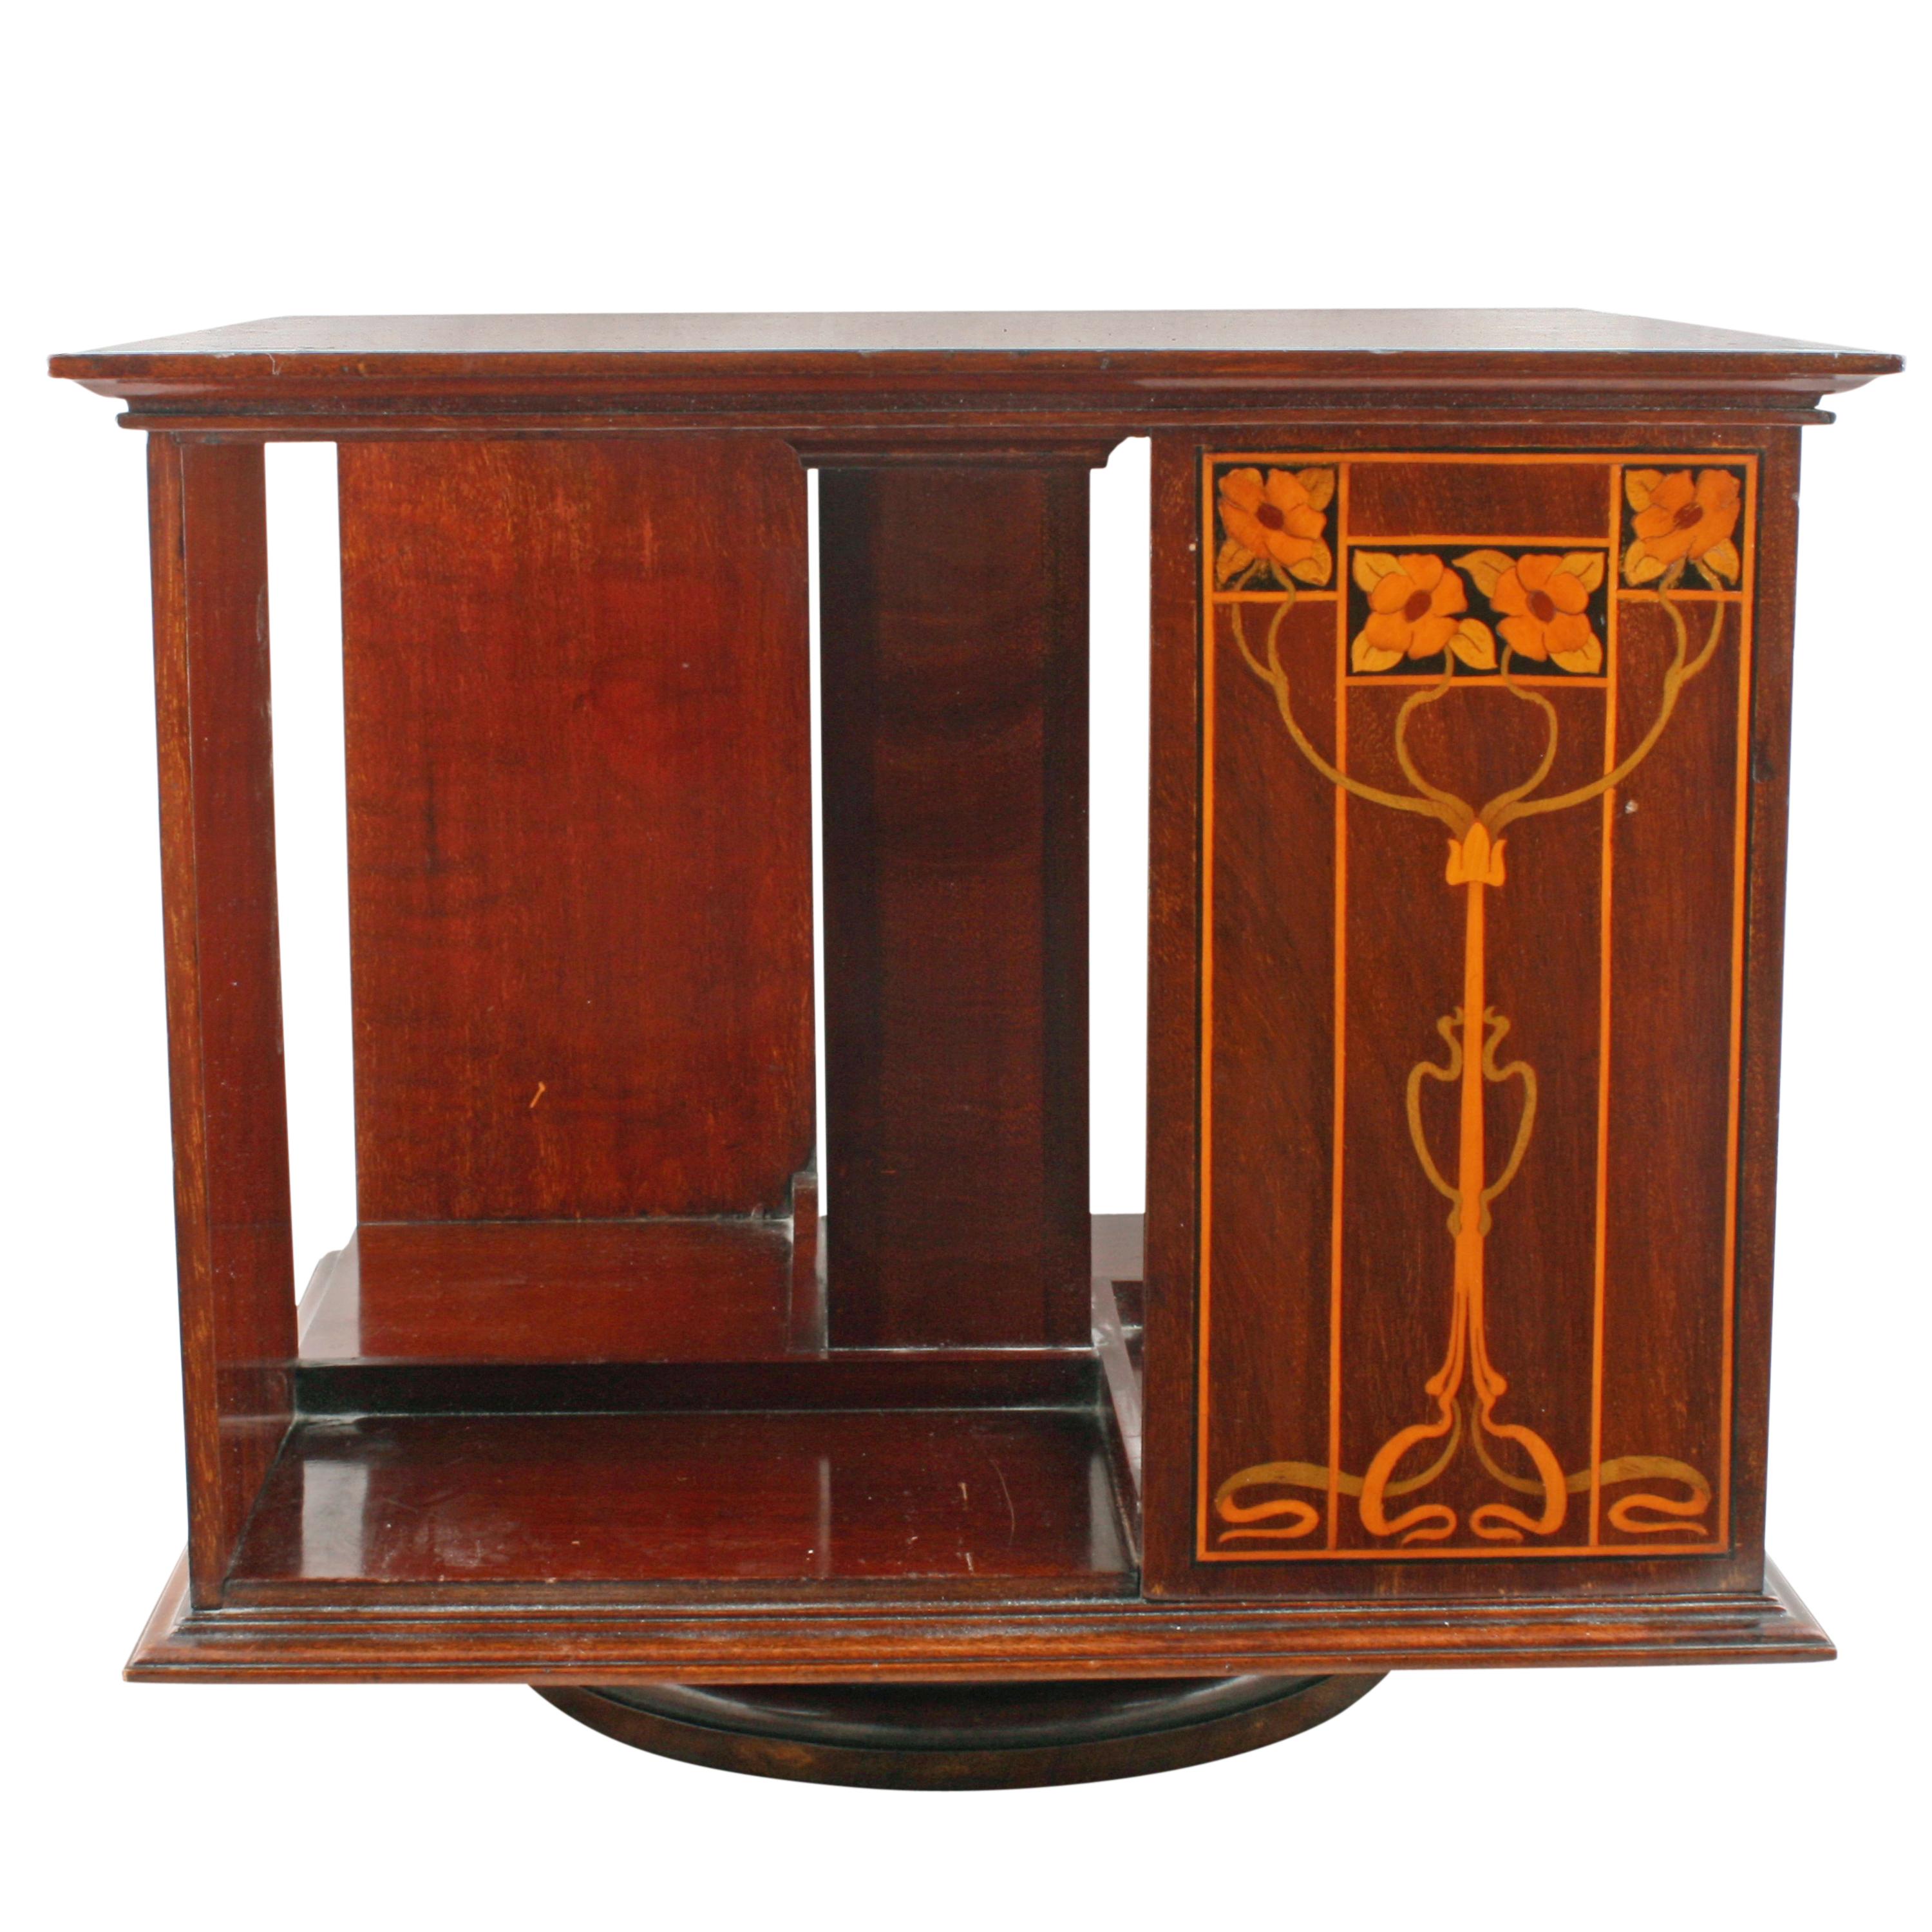 A late 19th century desk or tabletop mahogany revolving bookstand by Shapland & Petter.

The bookcase has four vertical panels of Art Nouveau inlay and four small inlaid squares top surface.

The bookcase sits on a circular plinth base with a